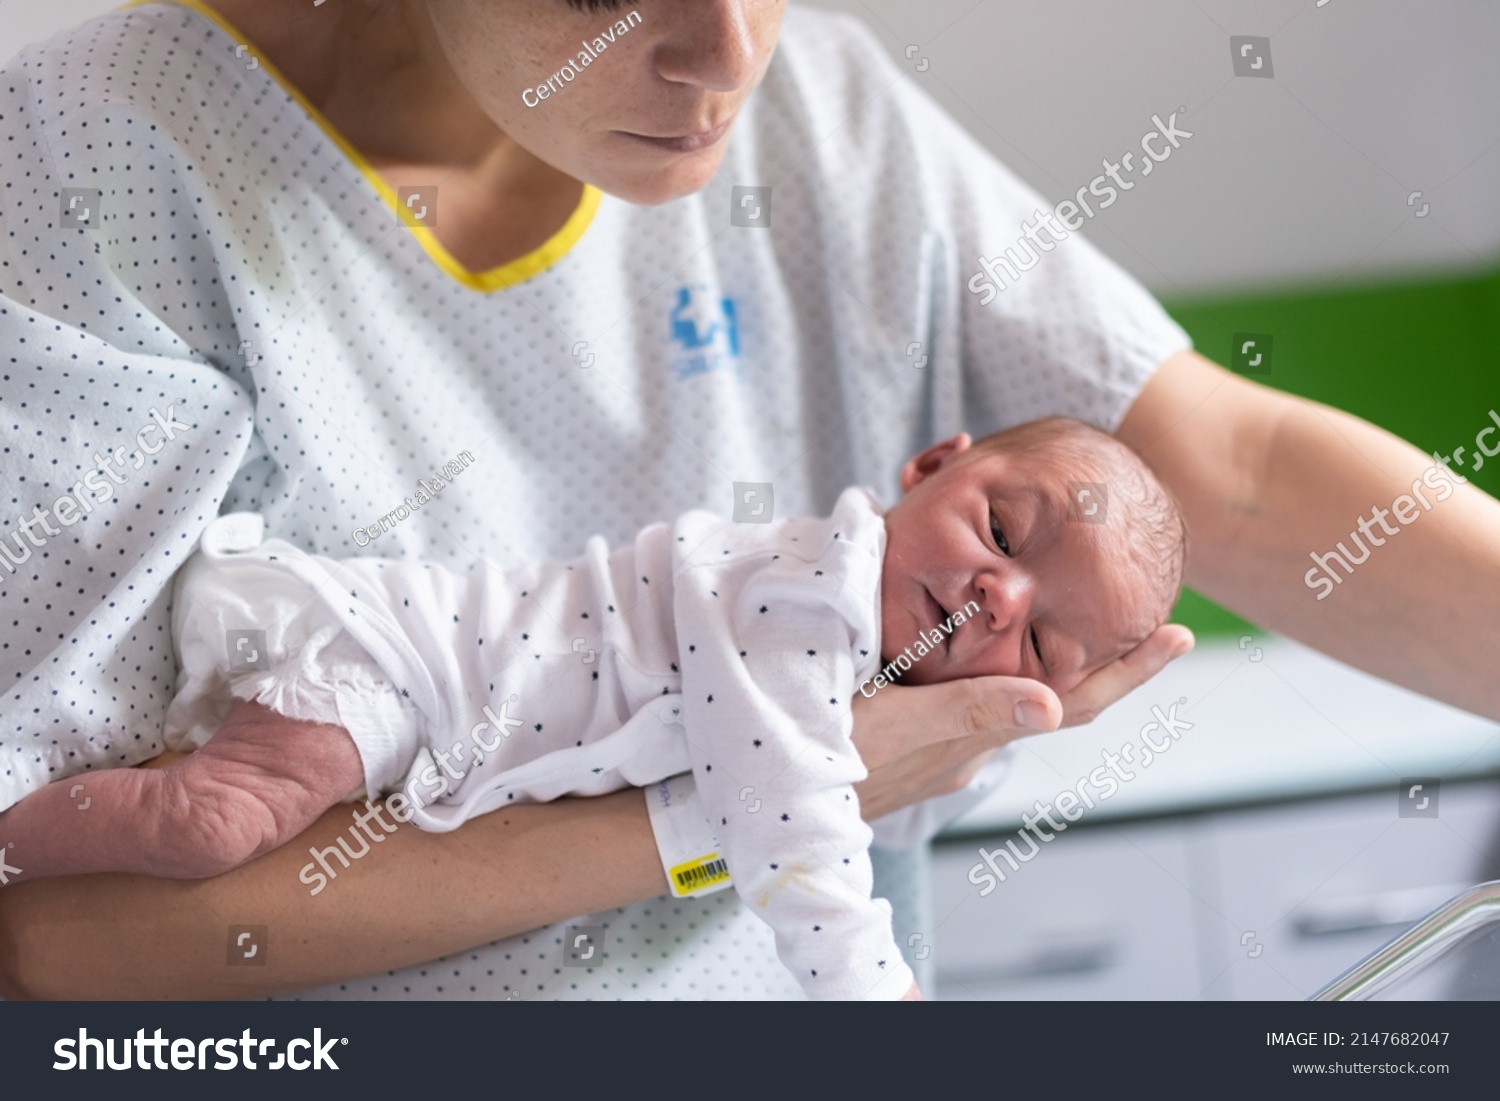 mom who has just given birth in the hospital holds her newborn baby in her arms face down to get rid of gas and prevent colic in the infant. newborn health and care #2147682047